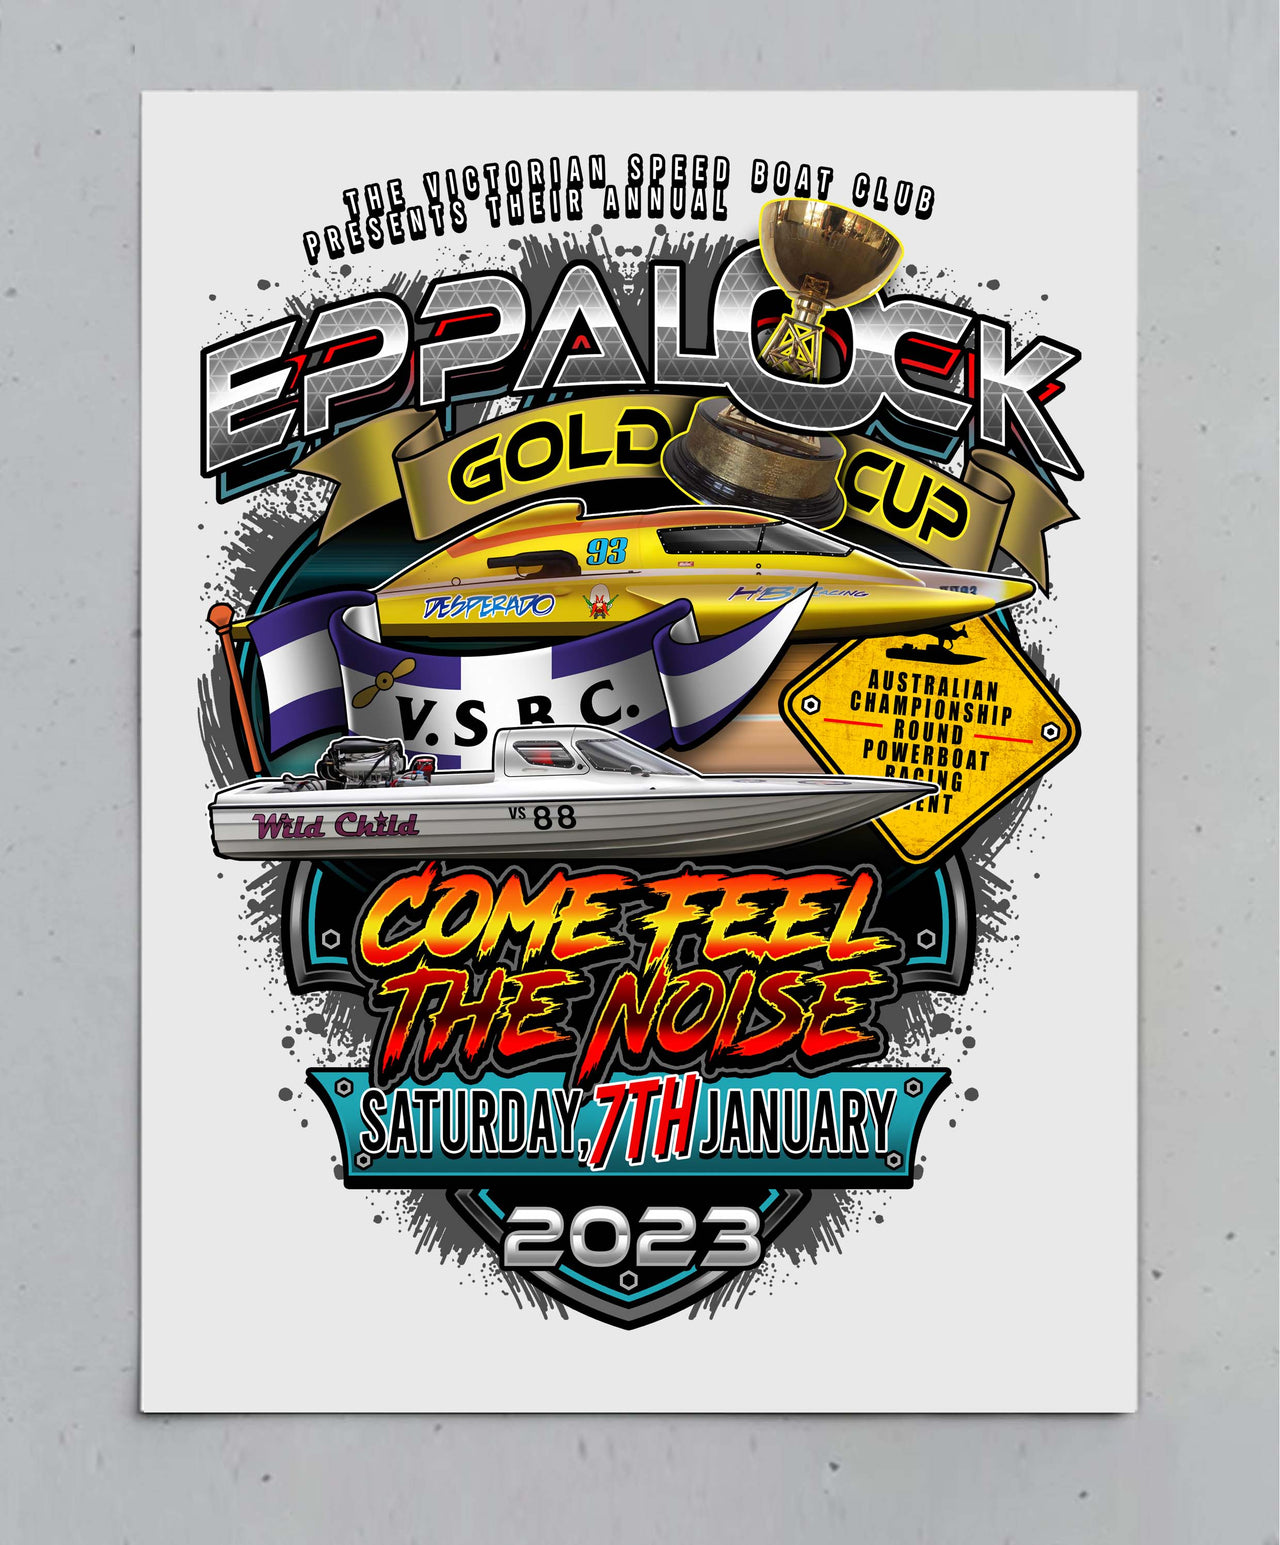 Eppalock Gold Cup 2023 Poster